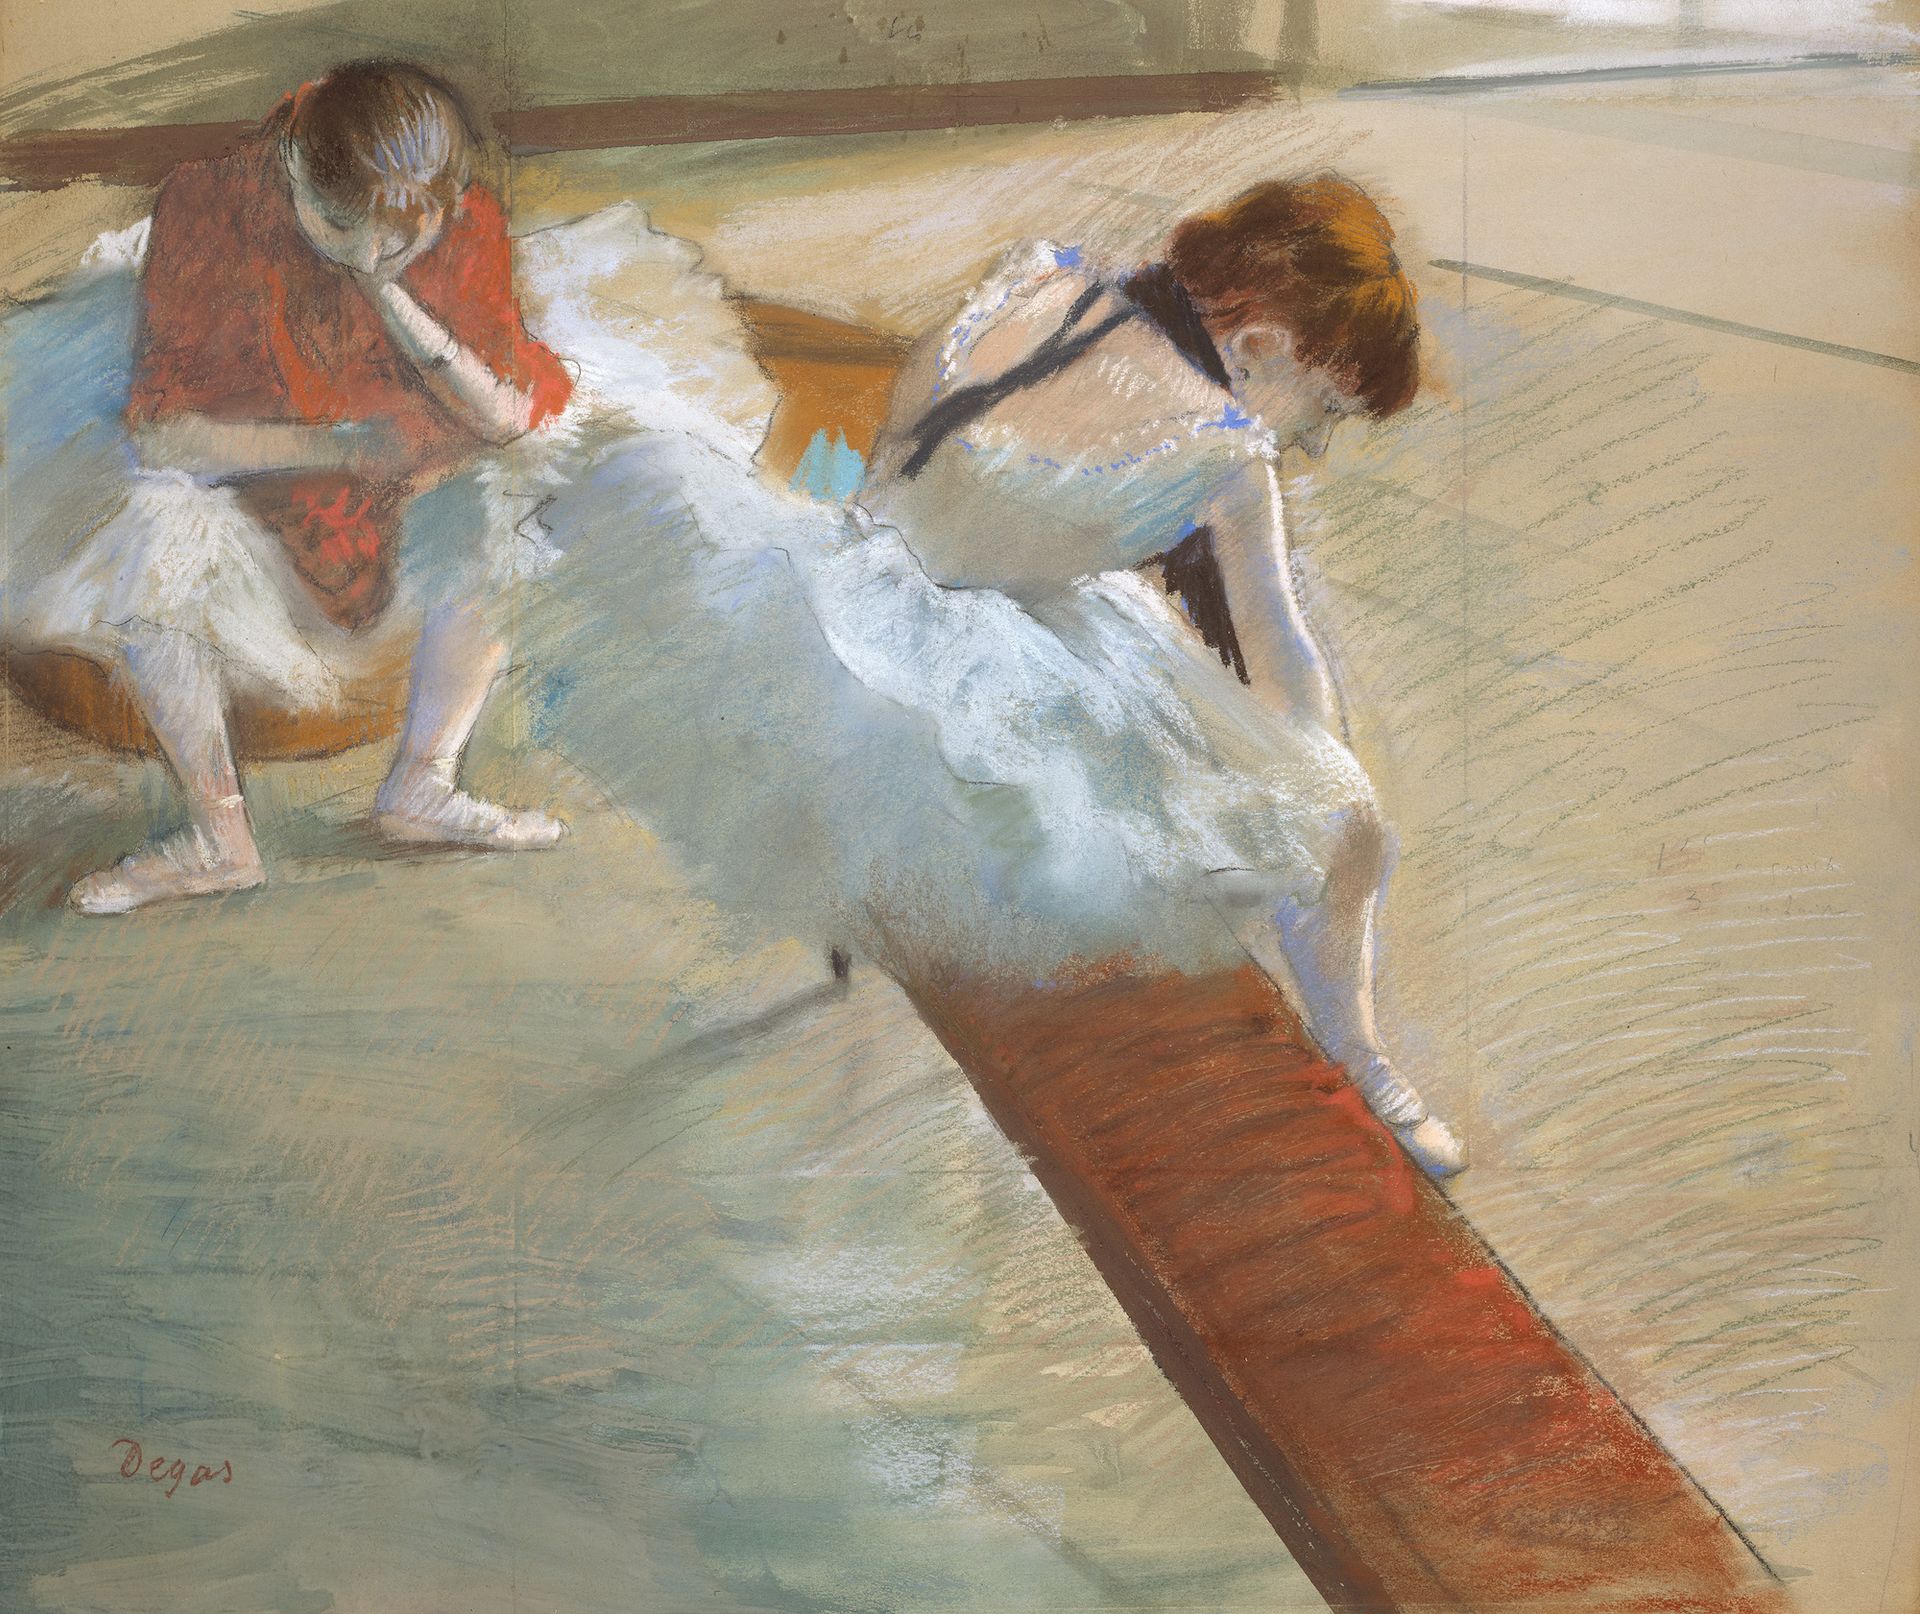 Edgar Degas, Dancers Resting, 1881–85, pastel on paper mounted on paperboard, Museum of Fine Arts, Boston, Juliana Cheney Edwards Collection Photograph © Museum of Fine Arts, Boston